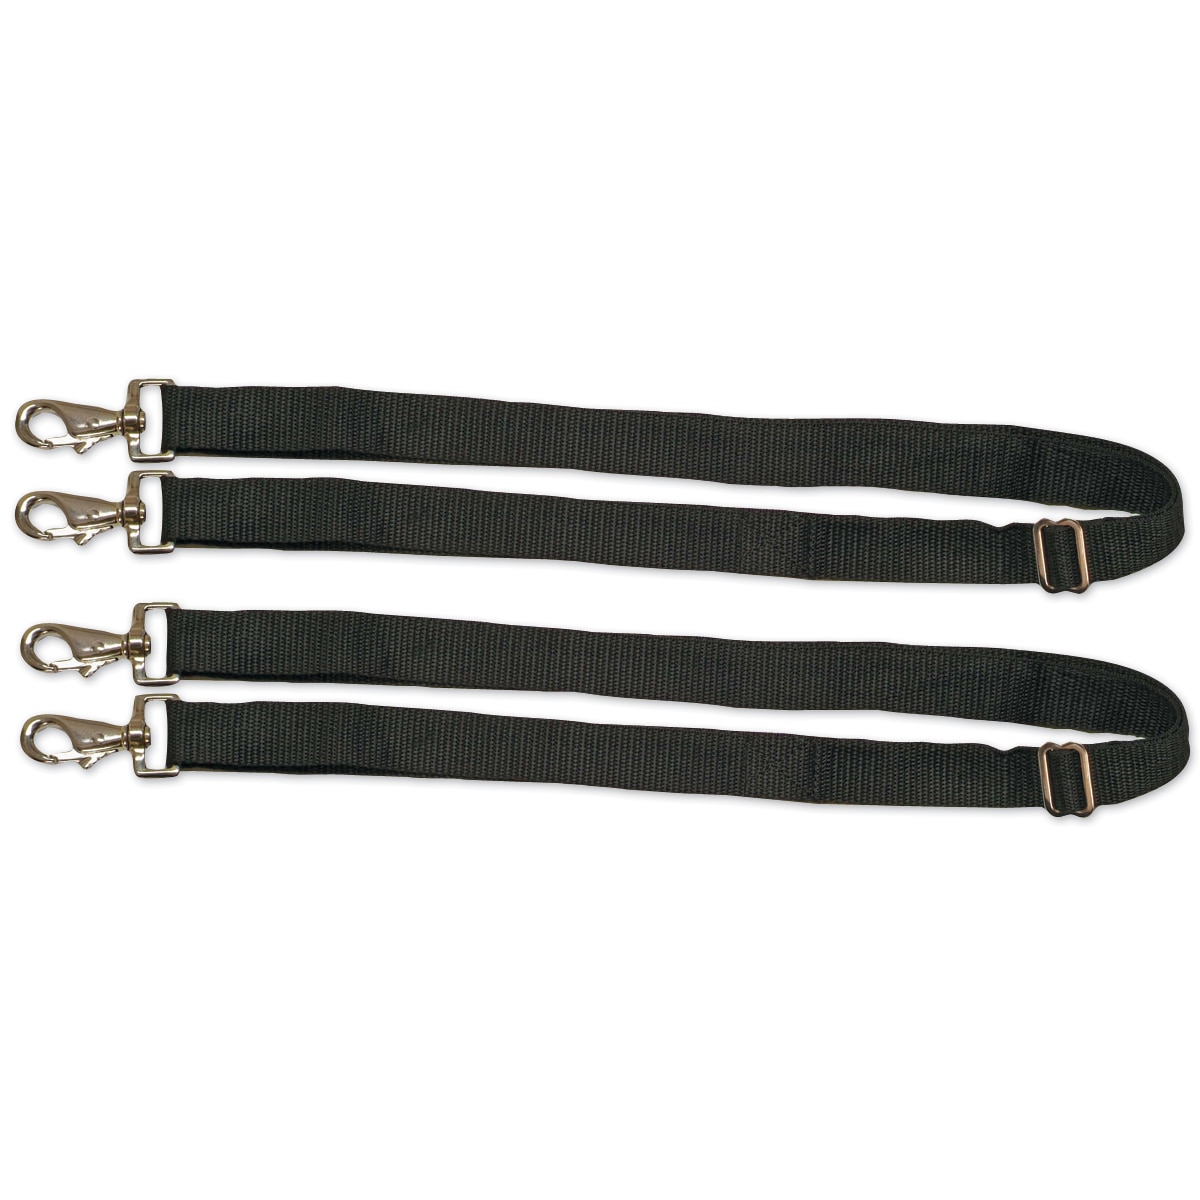 Derby Originals Premium Pair of Removable Universal Elastic Leg Straps for  Horse Blankets - Featuring a Loop End Safety Design and Premium Swivel